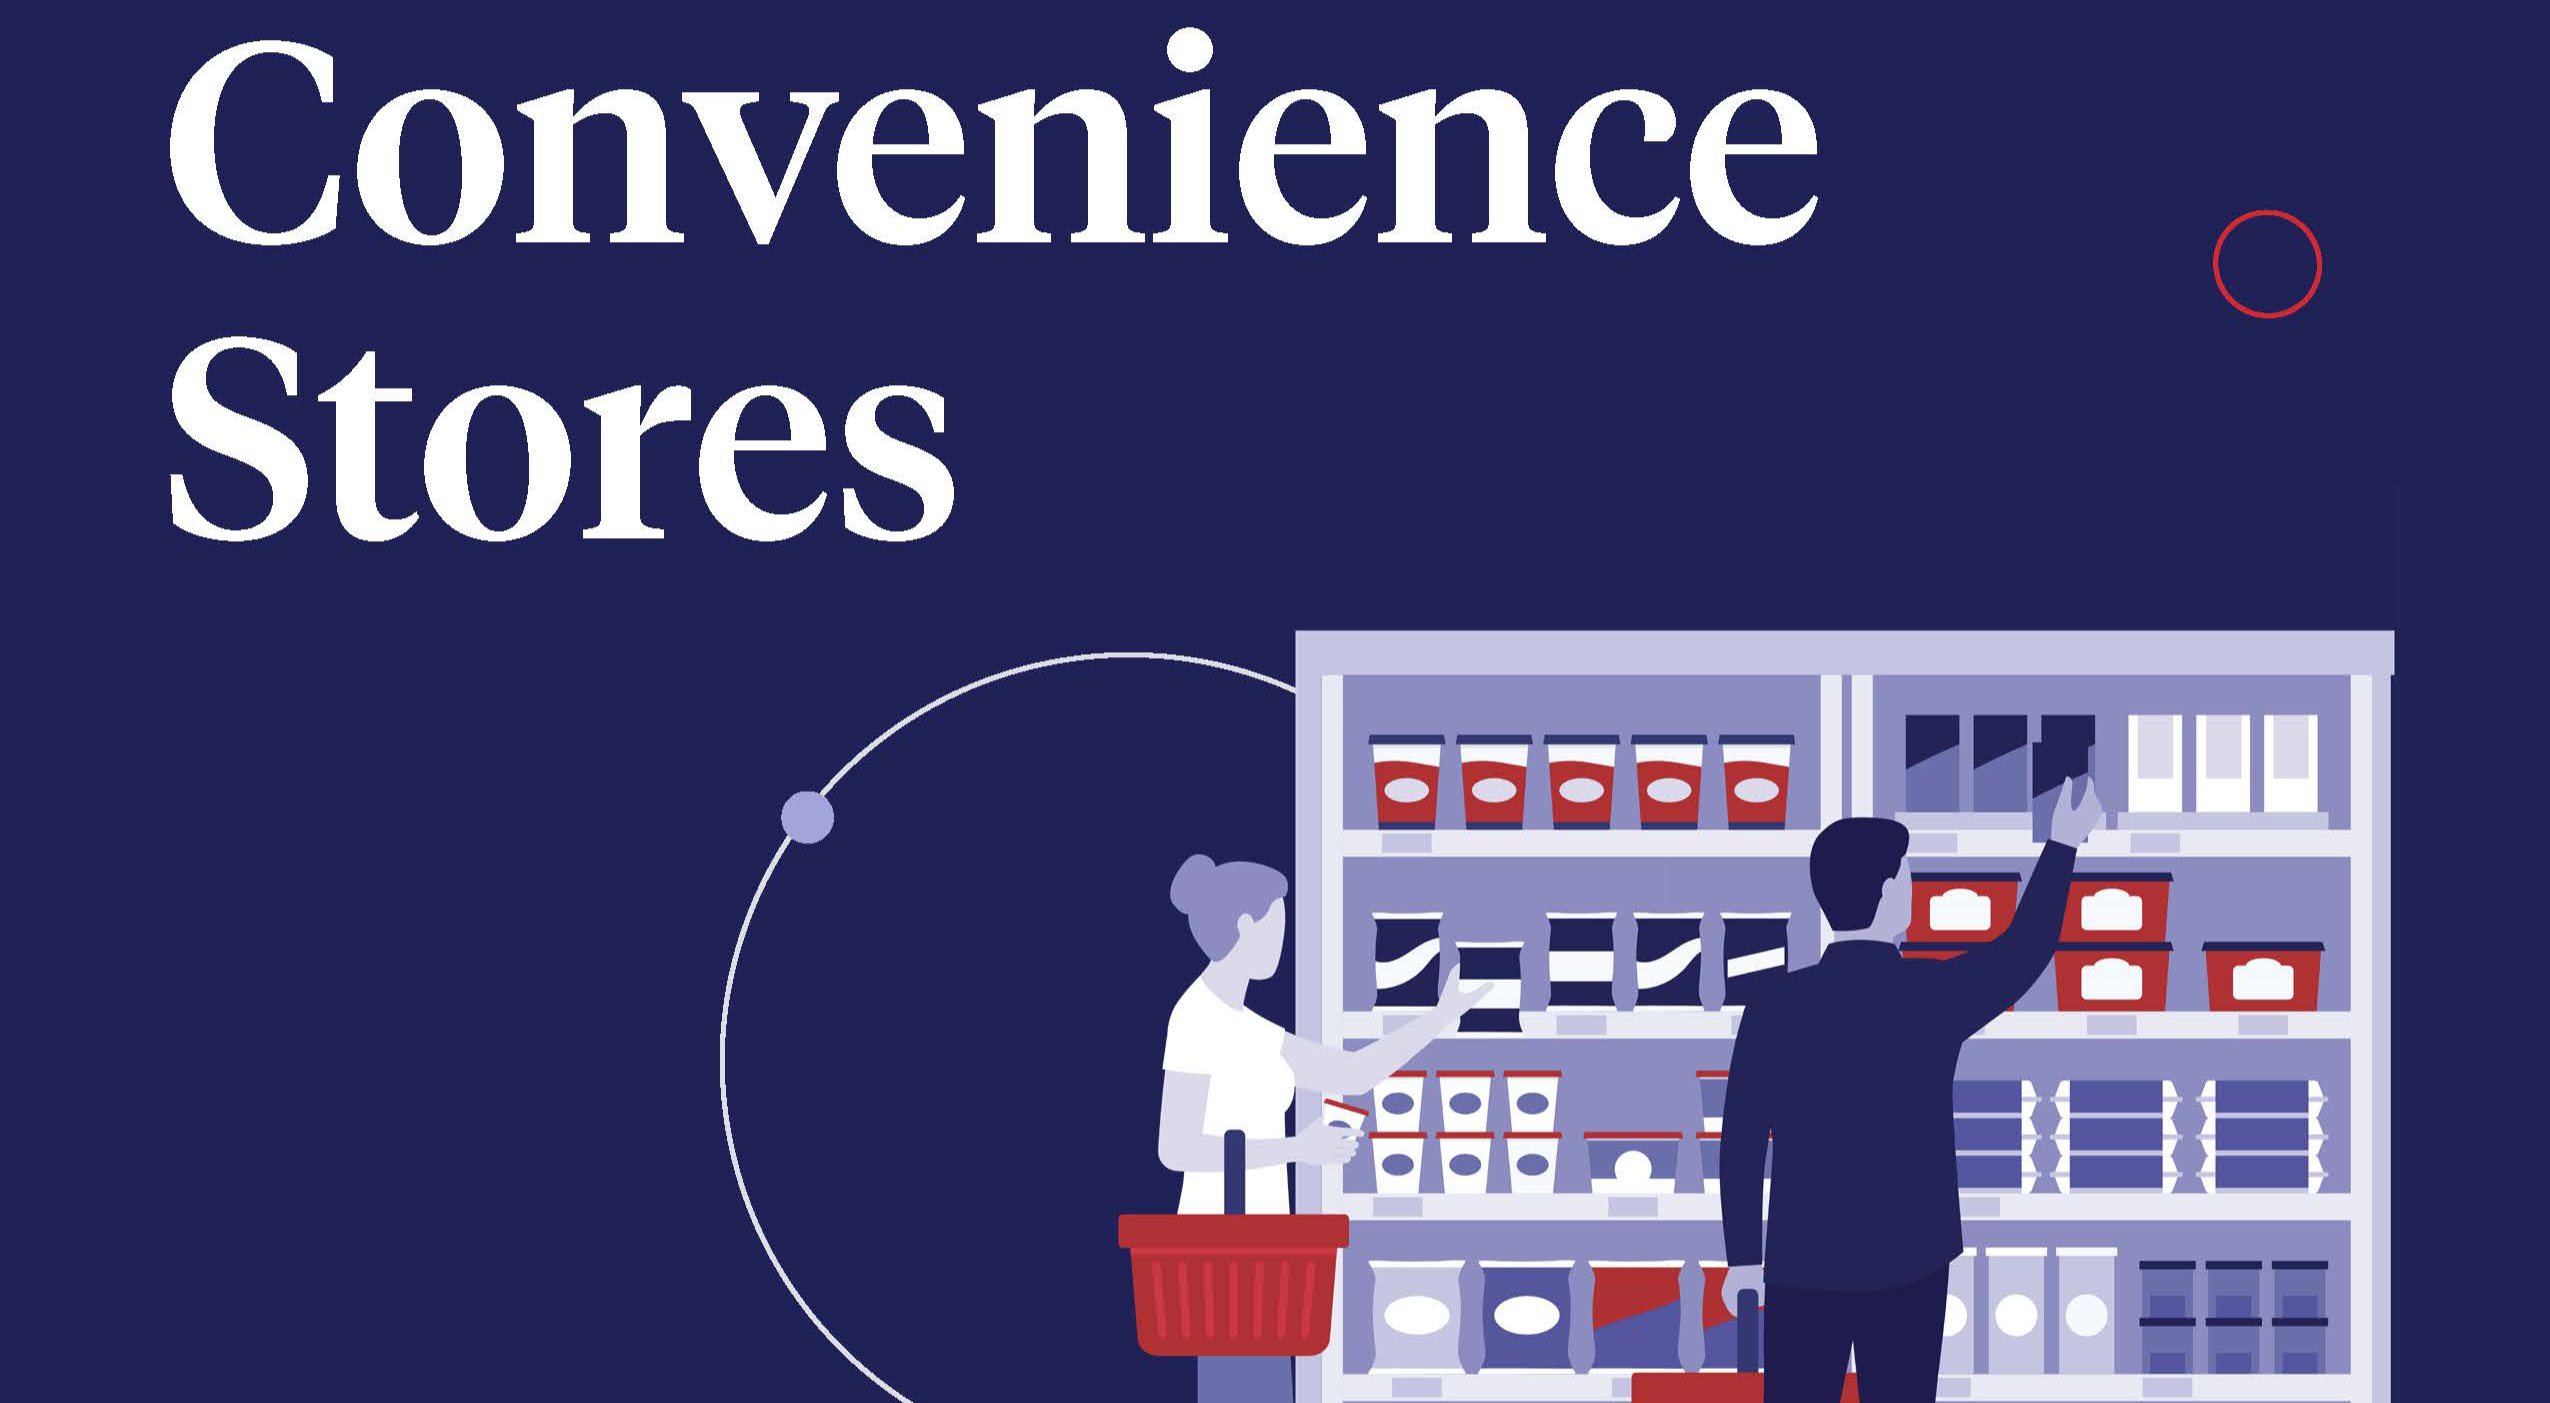 How Convenience Stores Are Evolving to Meet Consumer Needs